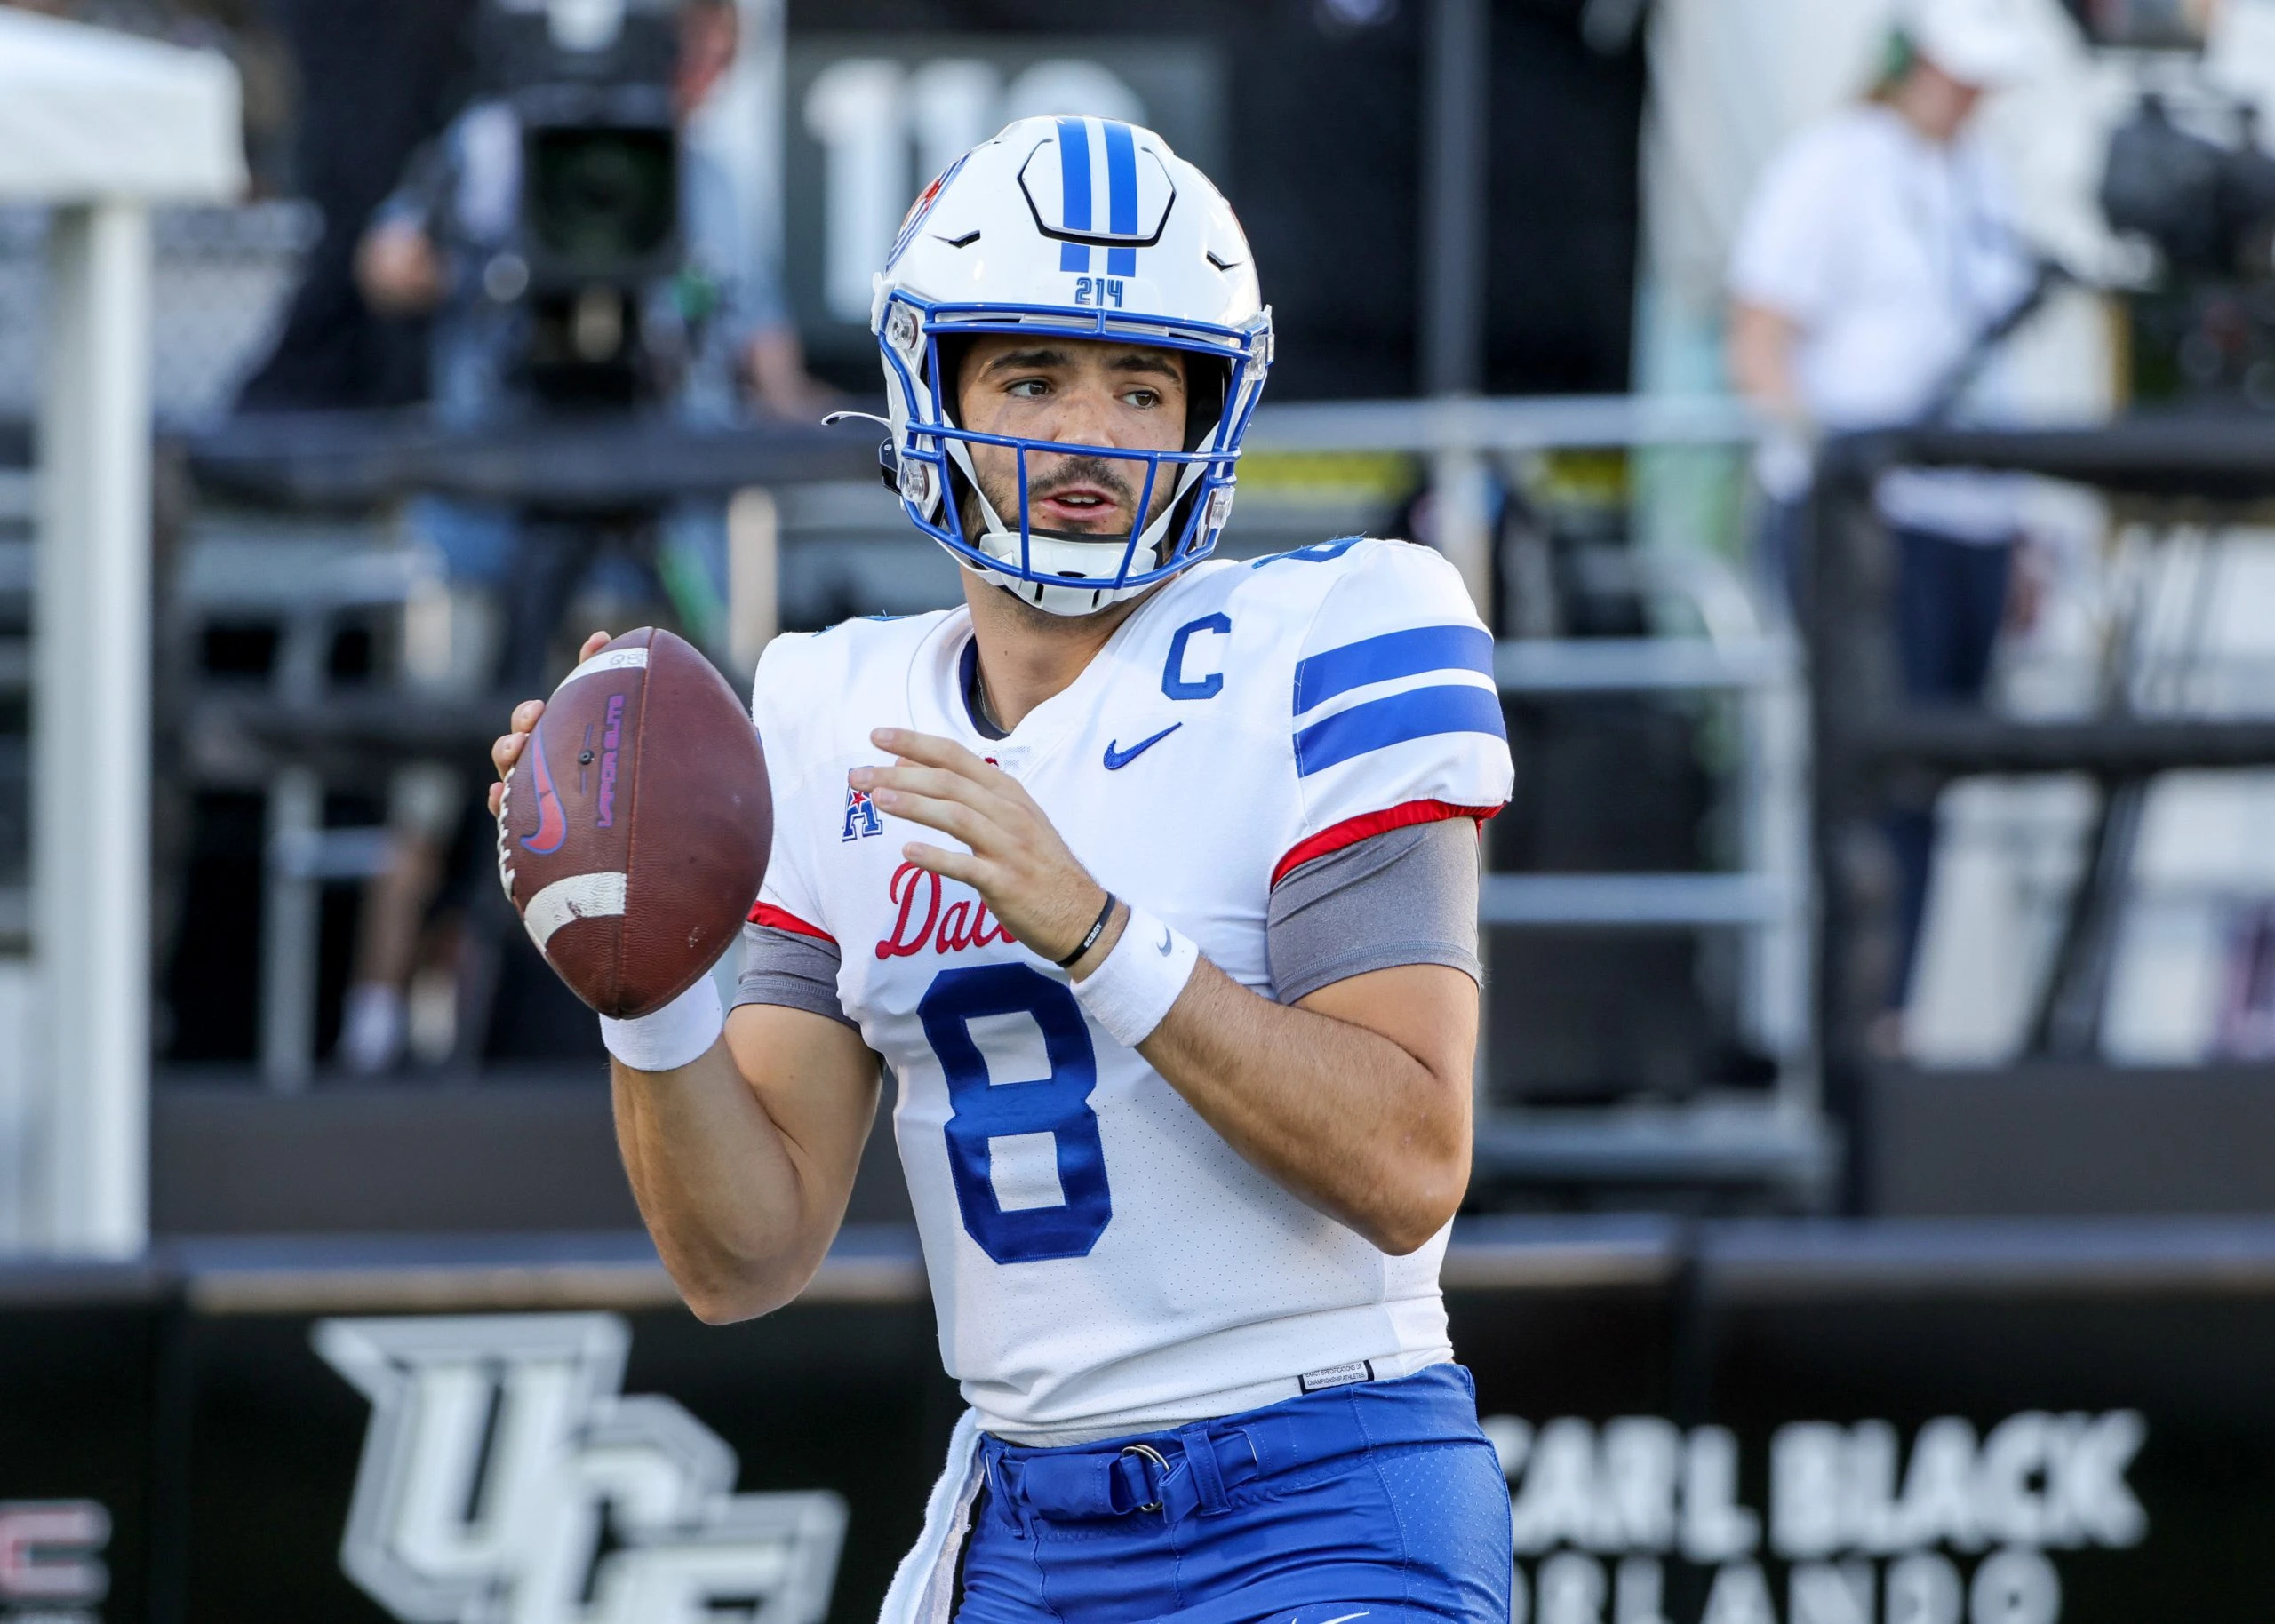 1Oct 5, 2022; Orlando, Florida, USA; Southern Methodist Mustangs quarterback Tanner Mordecai (8) warms up before a game against the UCF Knights at FBC Mortgage Stadium.